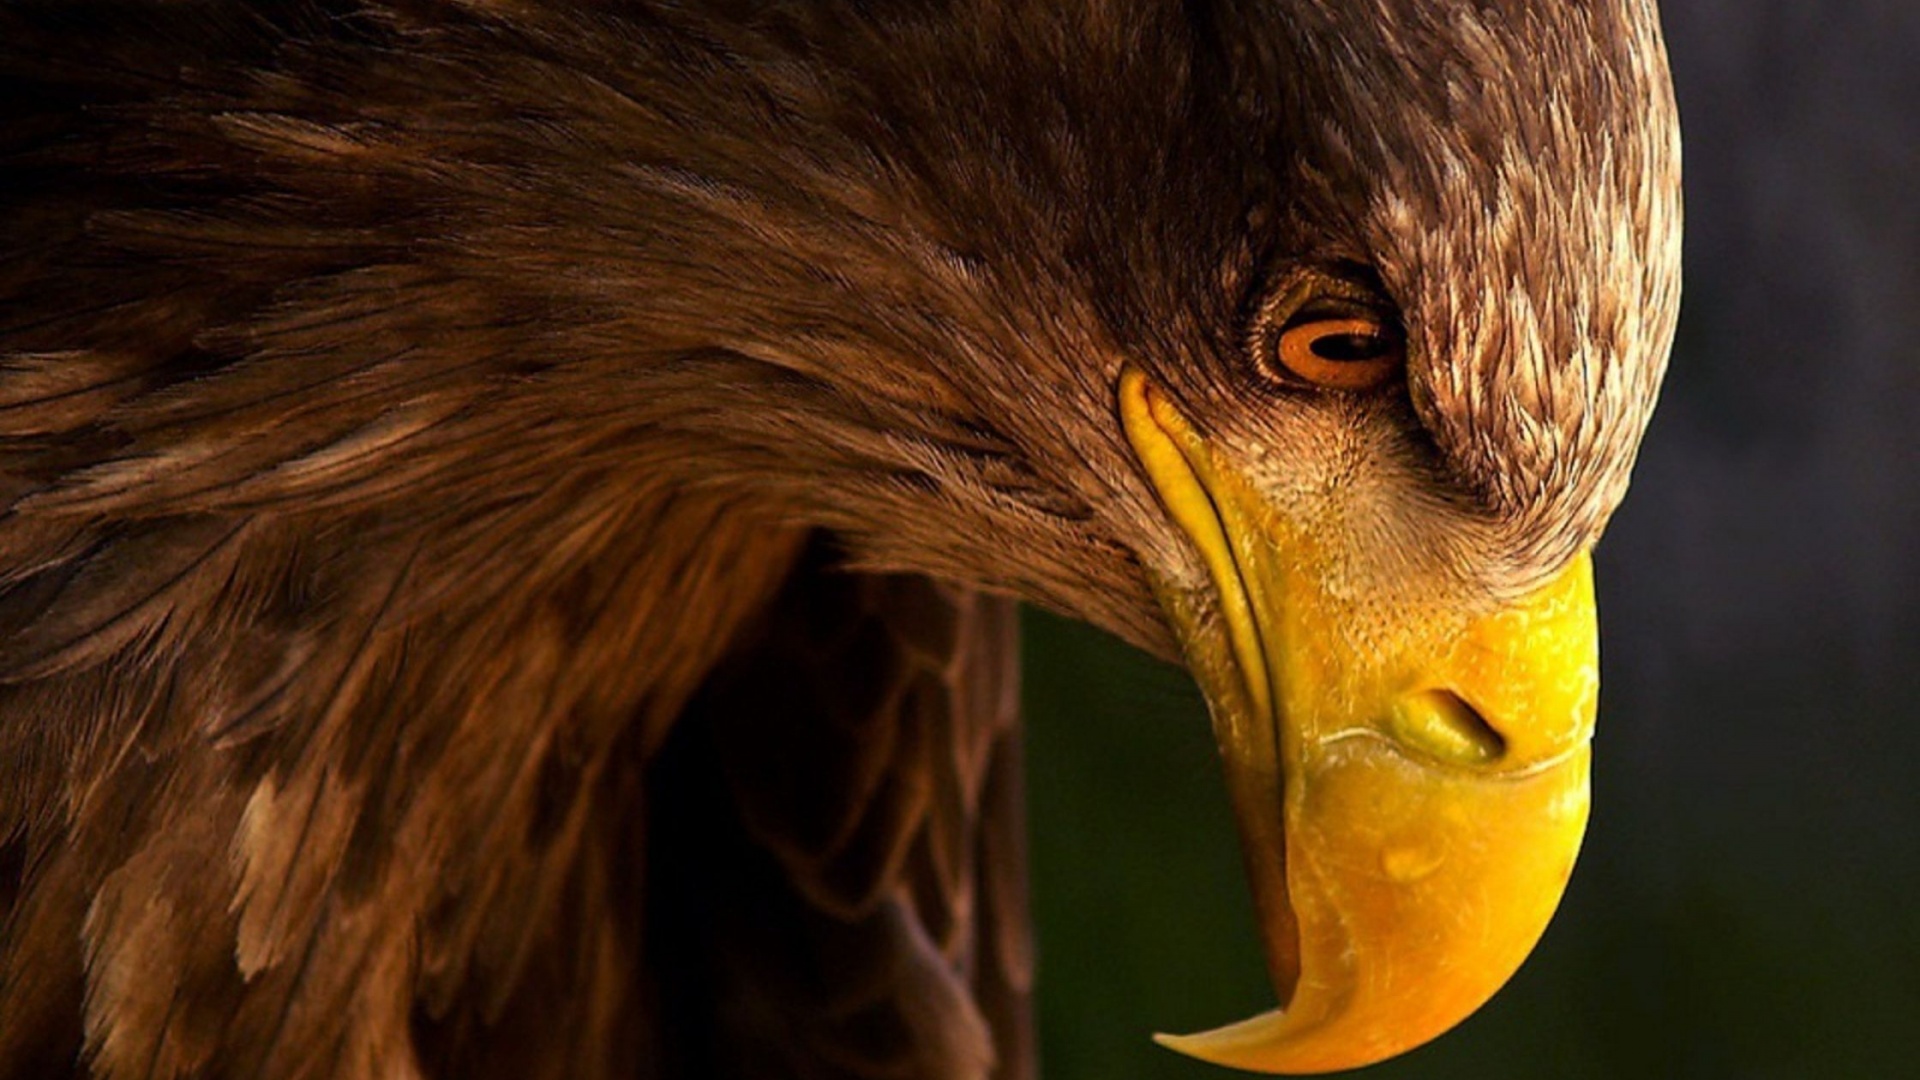 Terrible Eagle Hd Wallpaper - Awesome Pictures Of Eagle - HD Wallpaper 